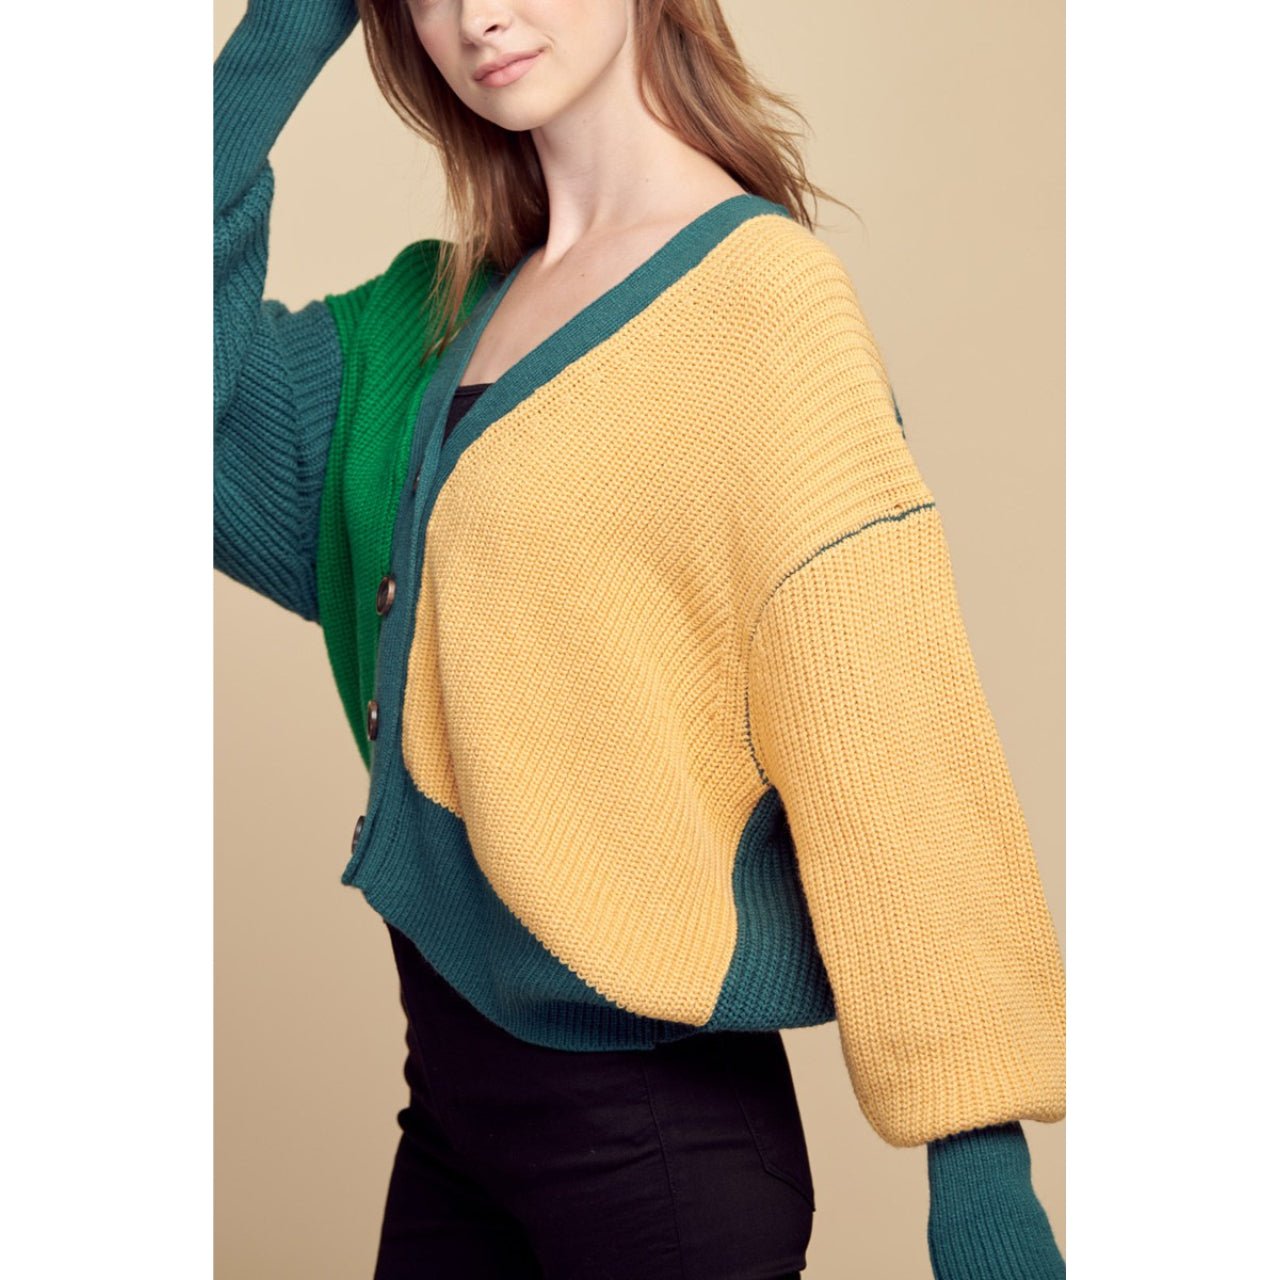 Callie Bold And Colorful Cardigan With V Neck and Drop Shoulder - The Graphic Tee